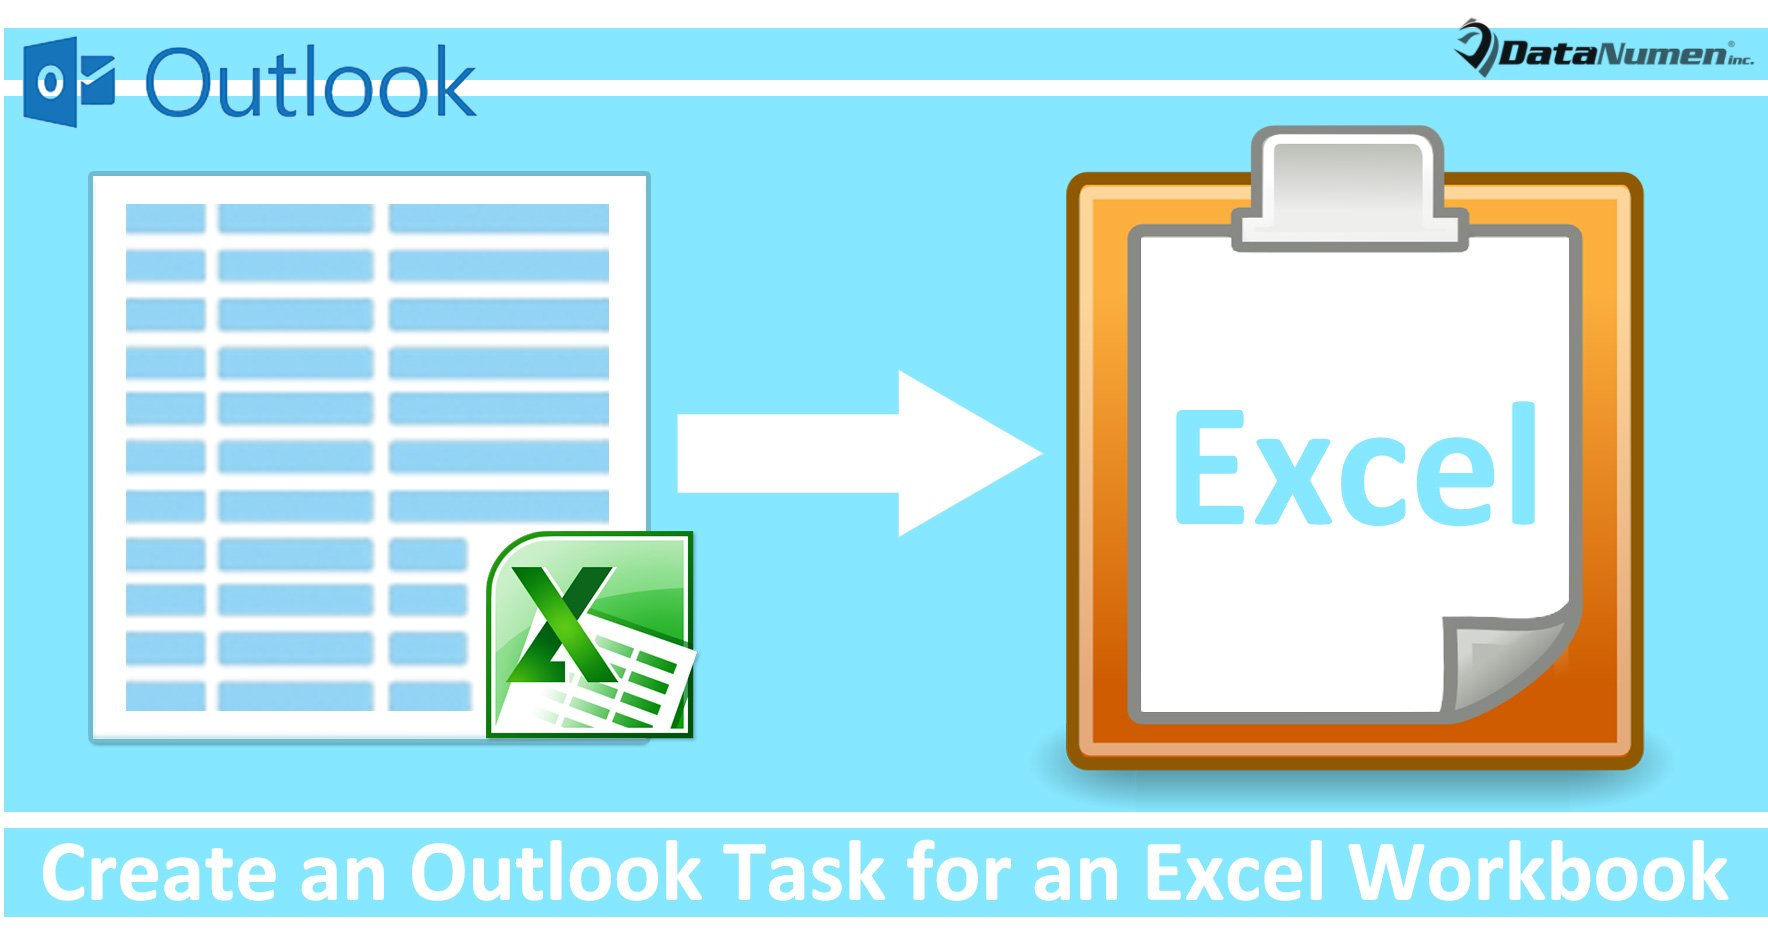 Quickly Create an Outlook Task for an Excel Workbook